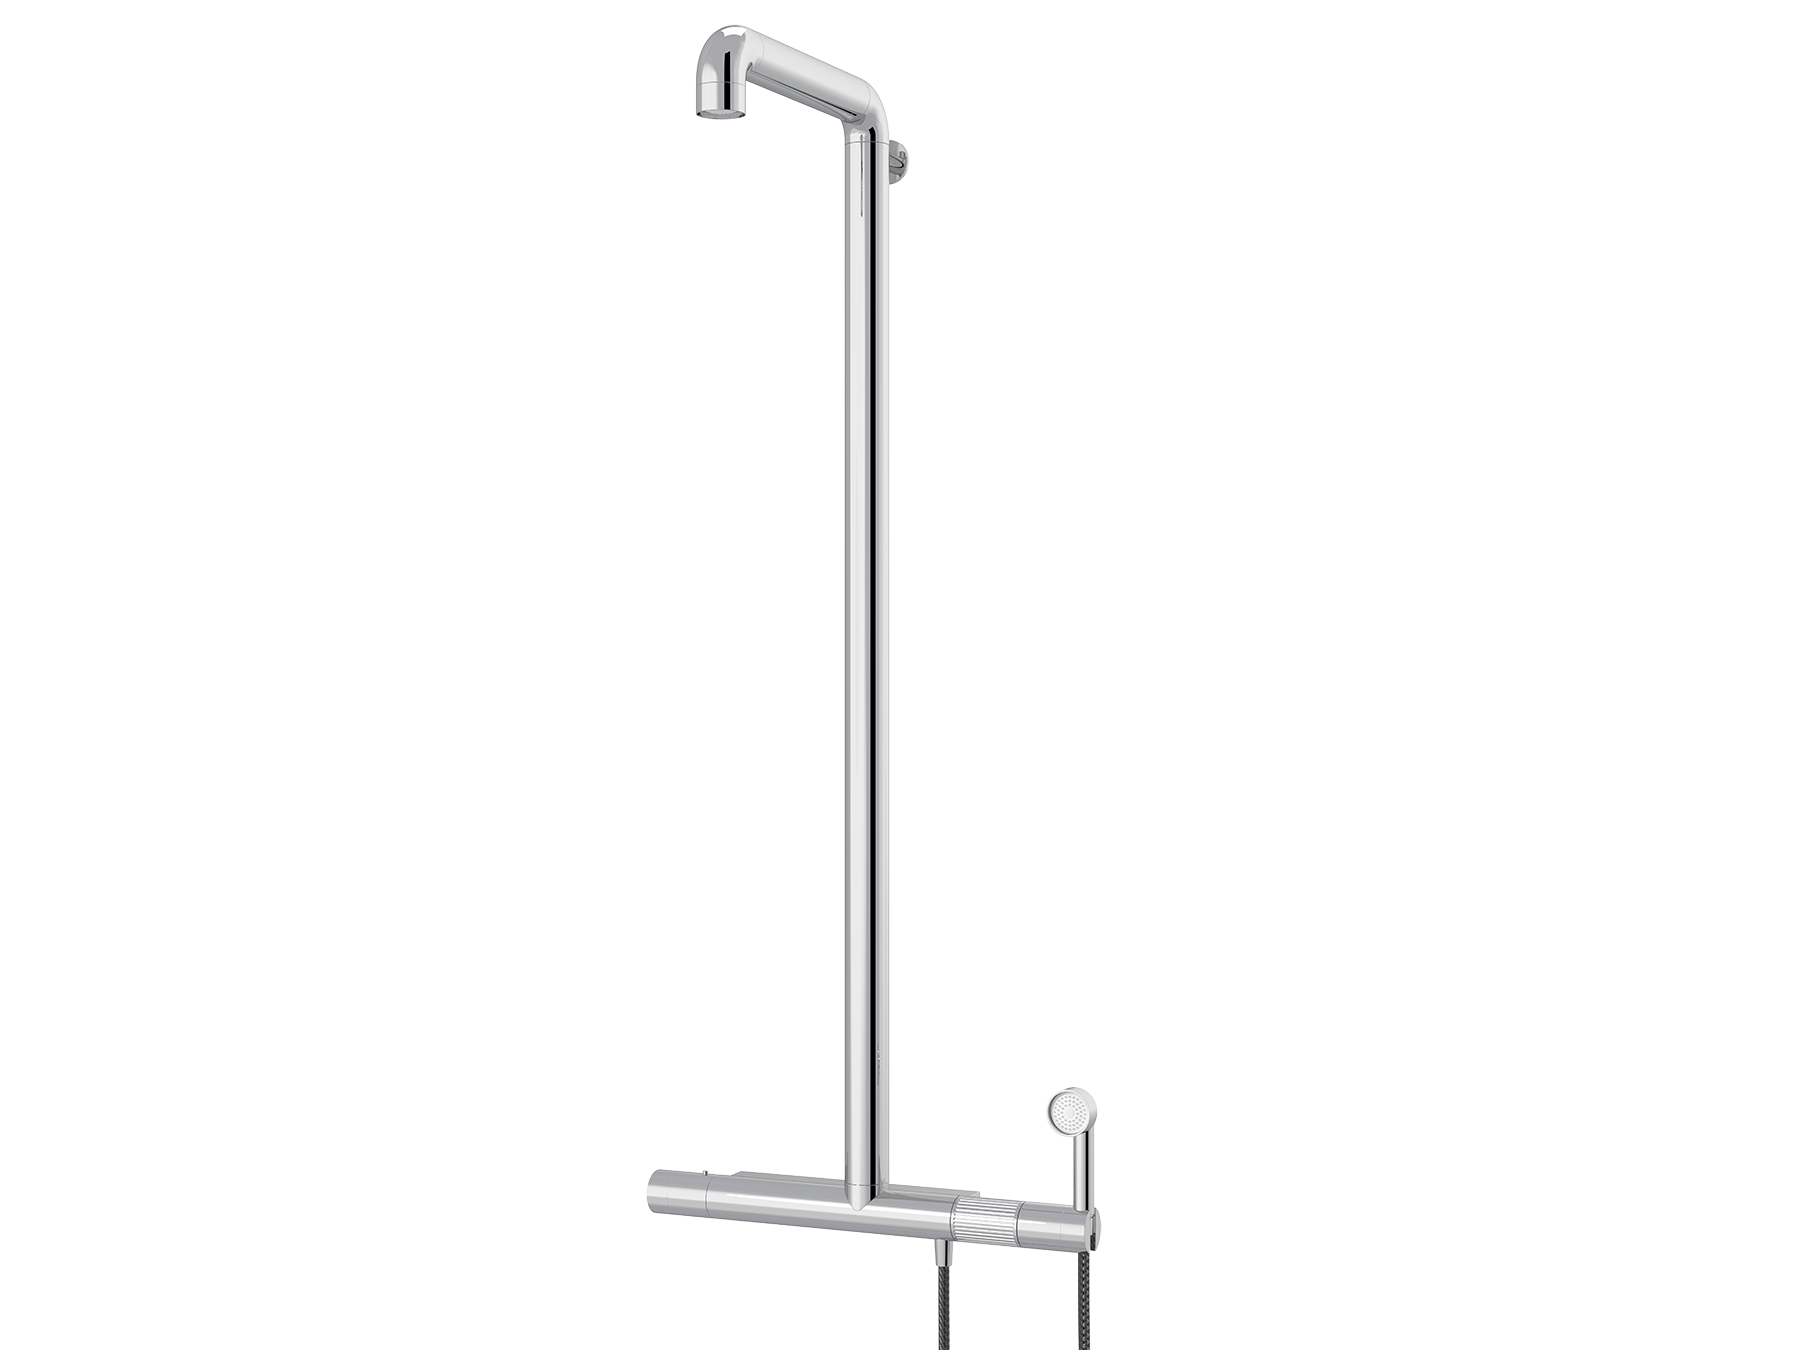 Set wall-mounted shower thermostatic with handshower, support, shower arm with diverter and rainshower head